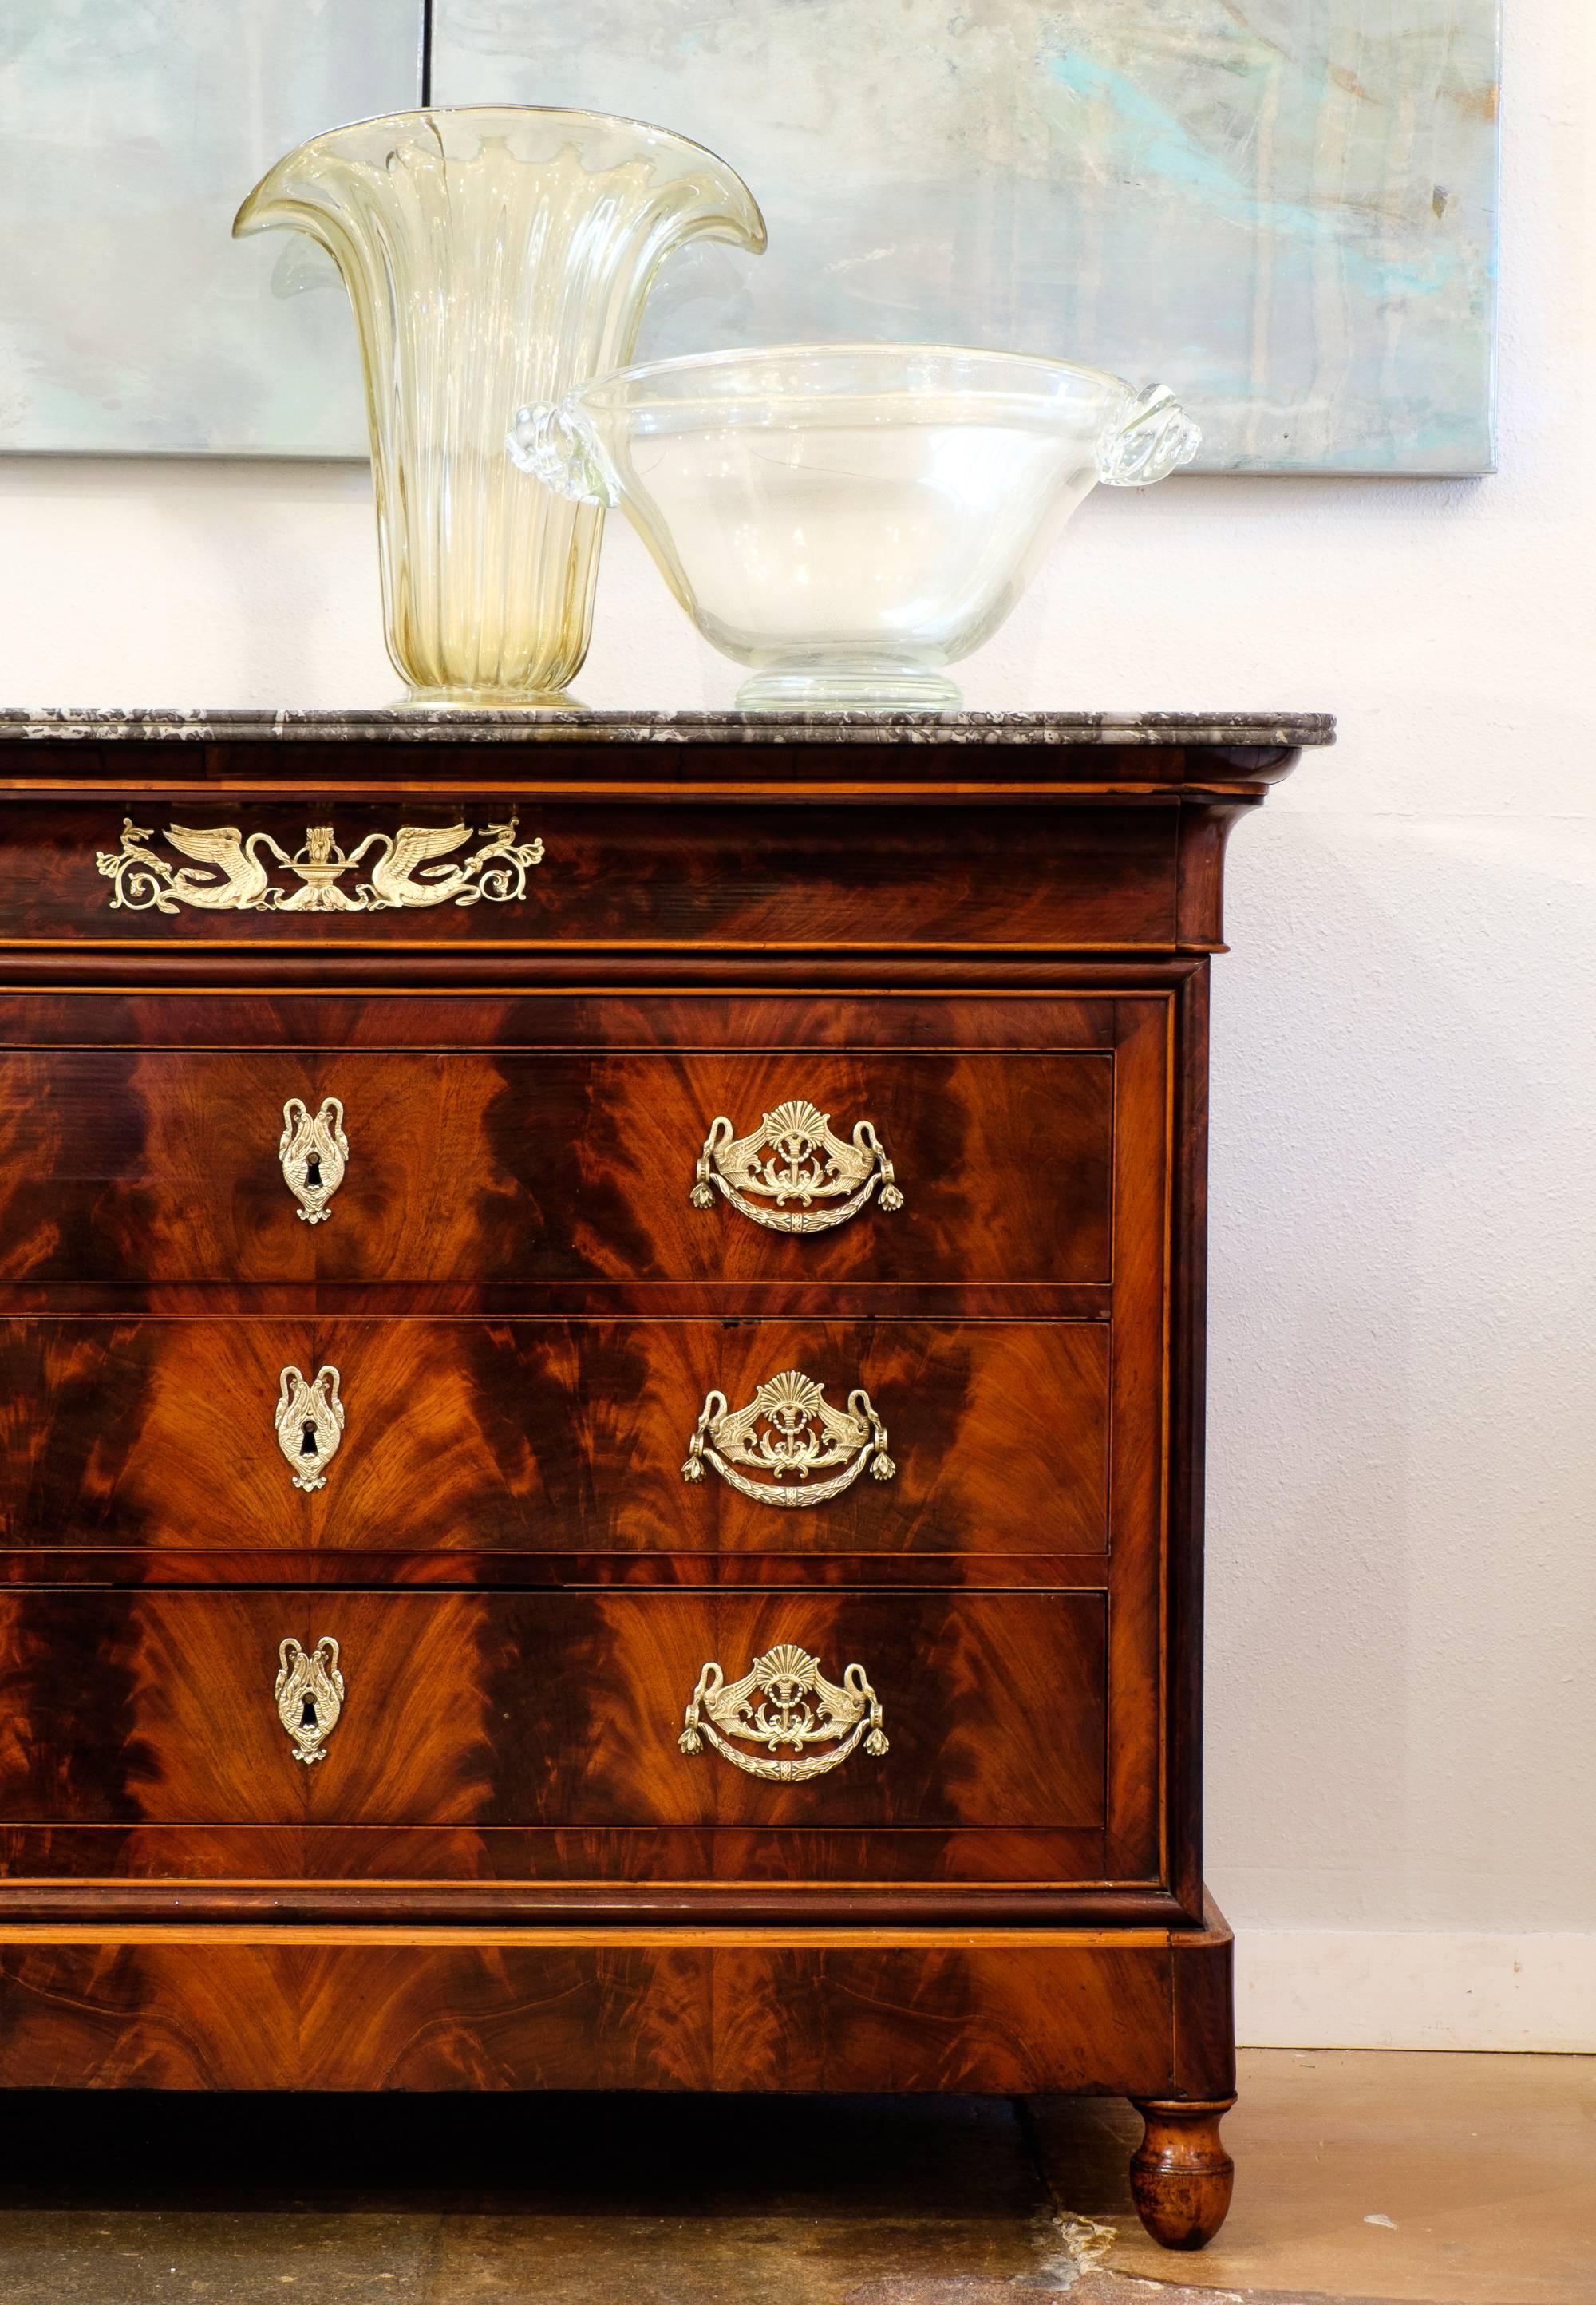 A stunning antique French Restoration period flamed mahogany chest of drawers topped with a beautiful Saint Anne marble top. Detailed with finely cast and pulls, key plates, and locks in bronze doré ormolu. Offers three dovetail drawers for storage.